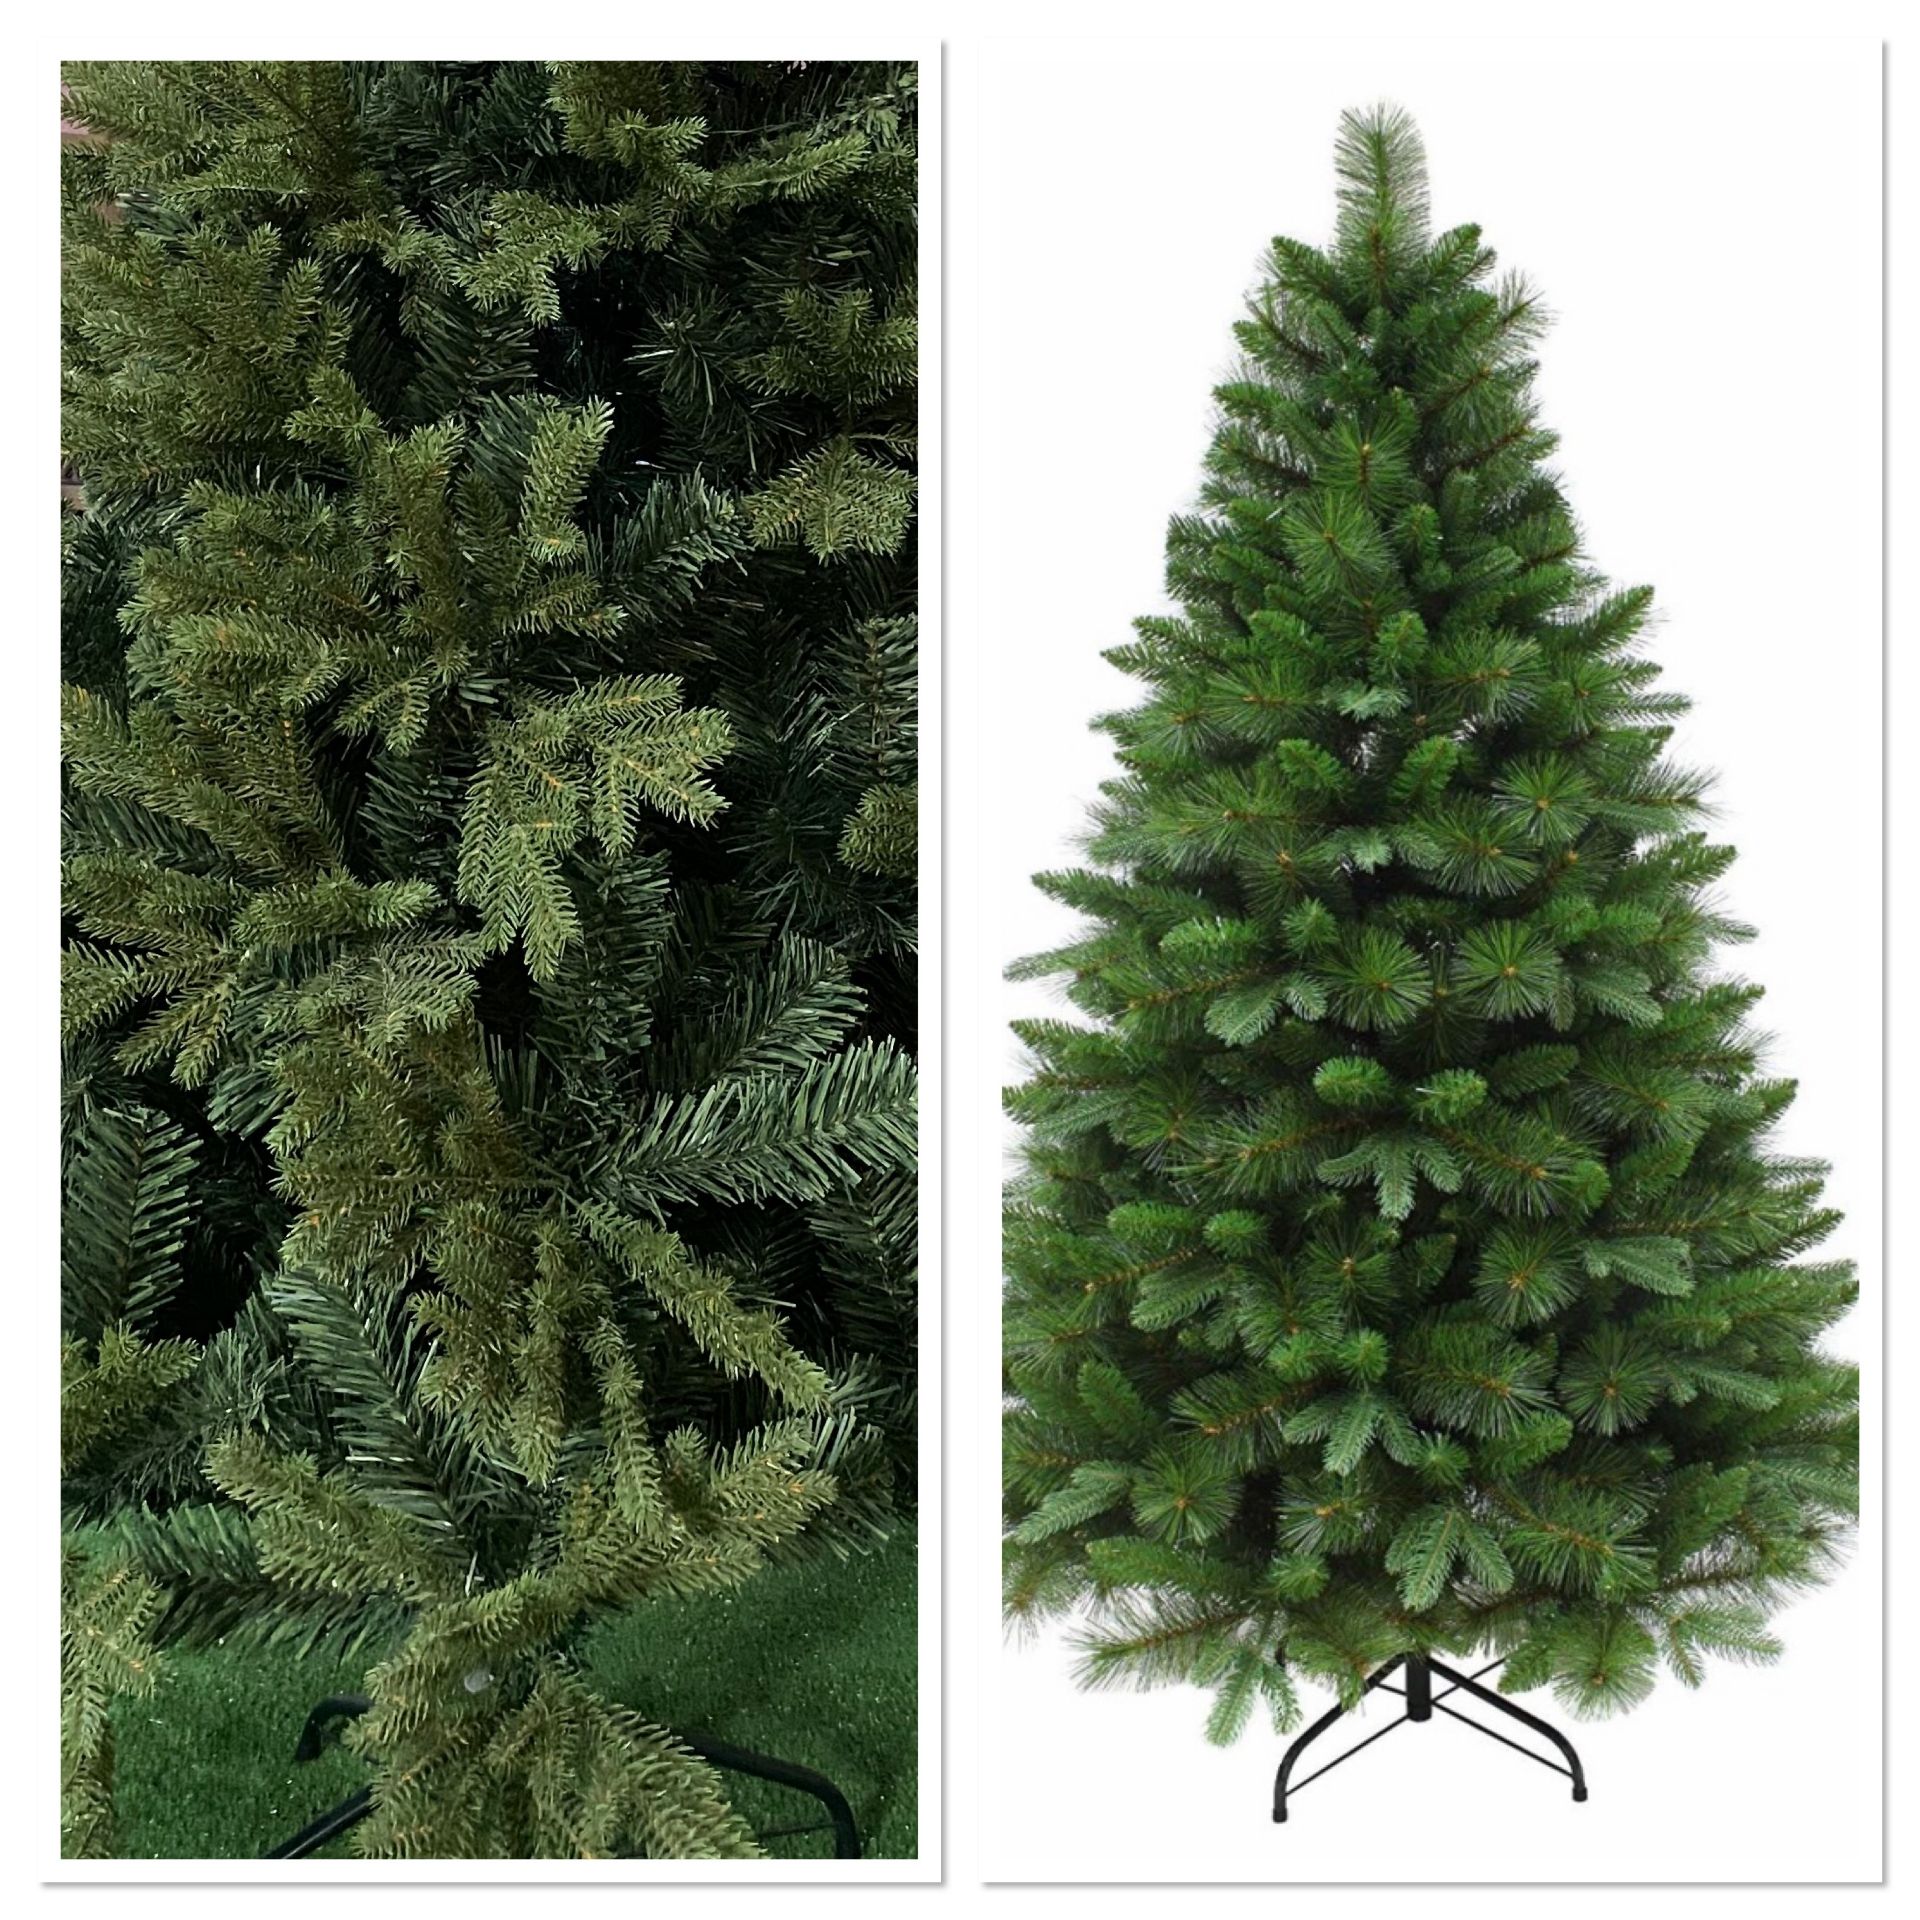 5 x 6FT Christmas Tree With Mixed Spruce Branches - Image 2 of 2